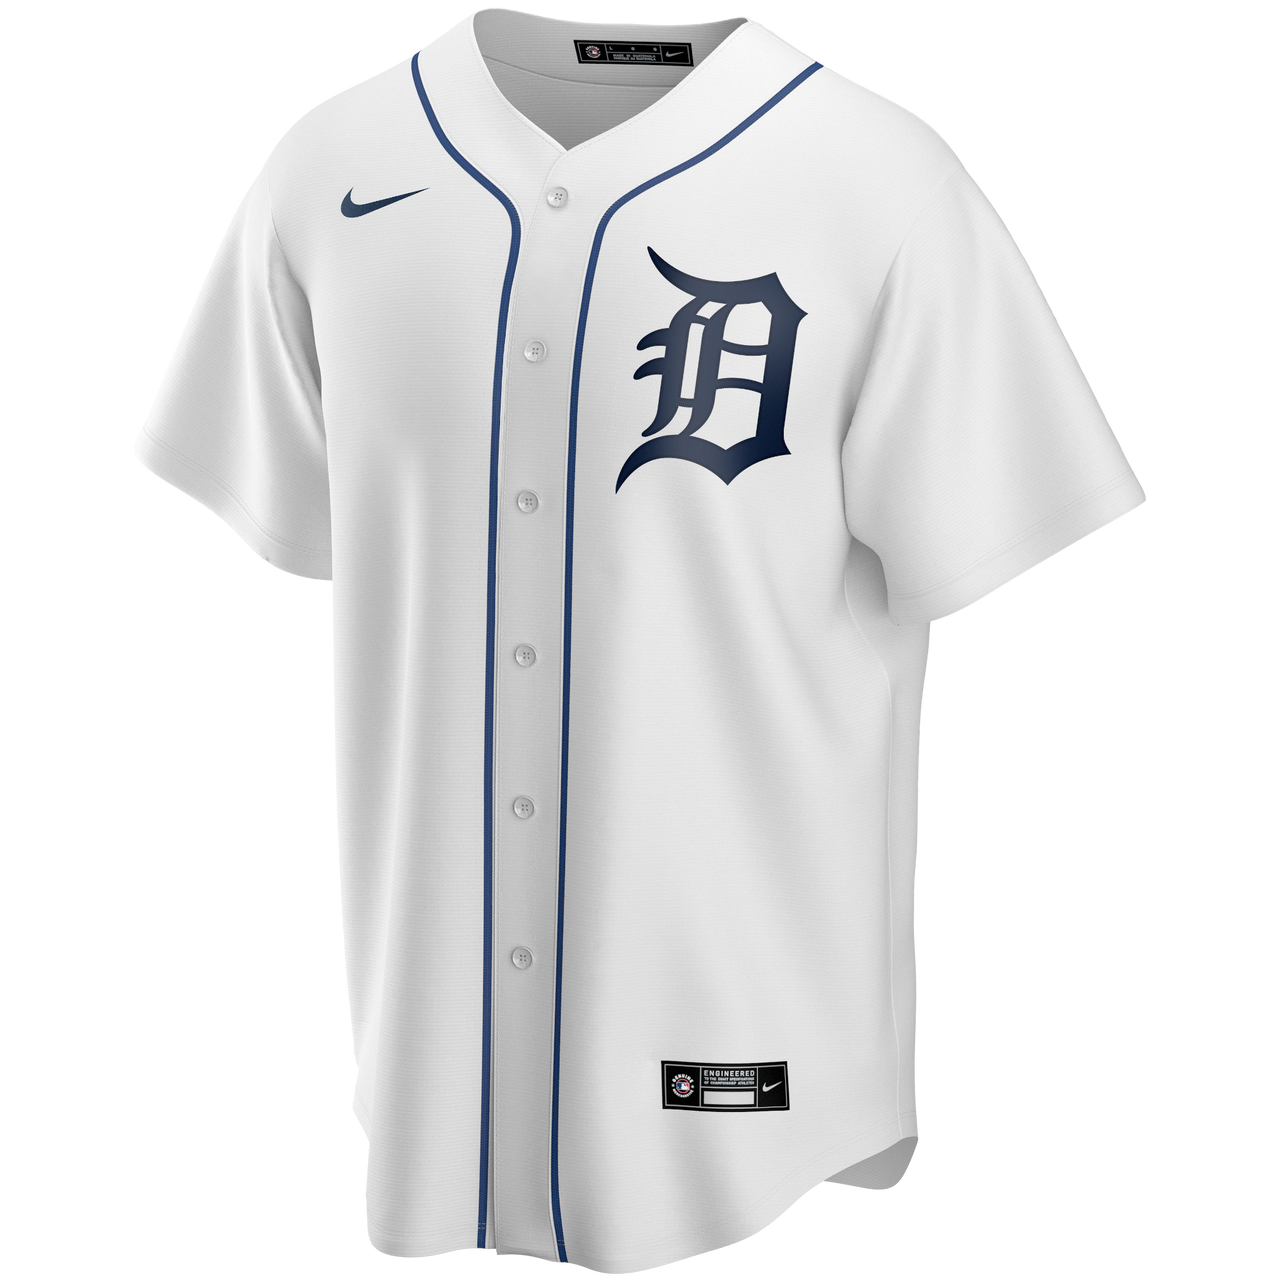  Majestic Athletic Adult 2X Detroit Tigers Officially